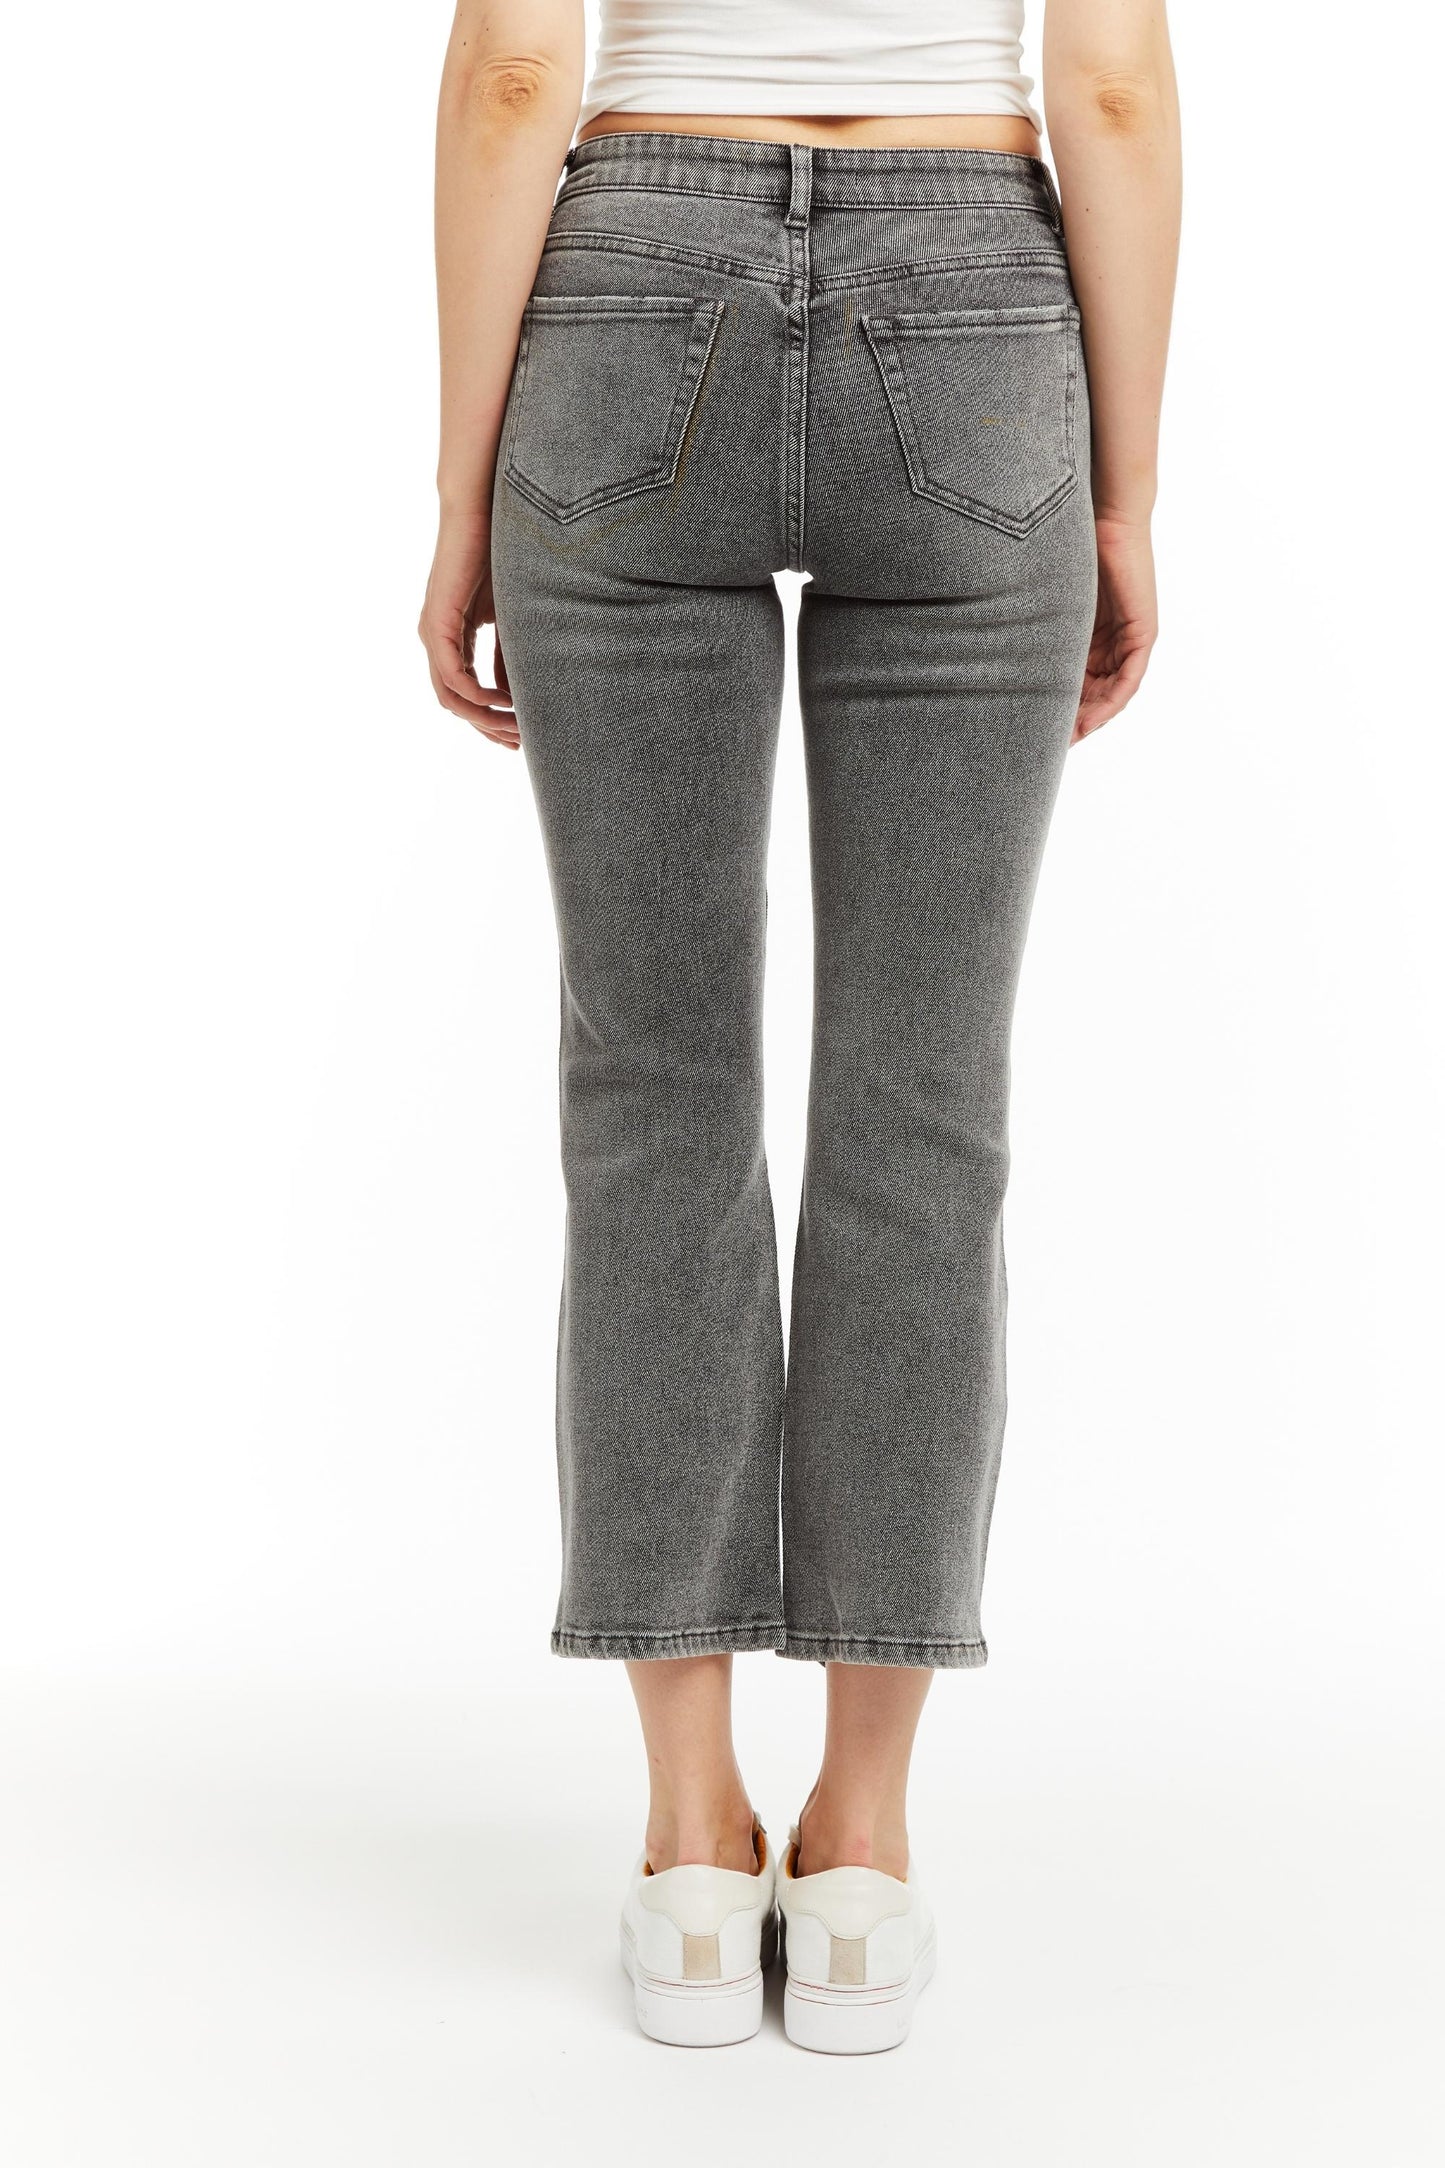 BUTTON ME UP HIGH RISE CROP FLARE IN GREY